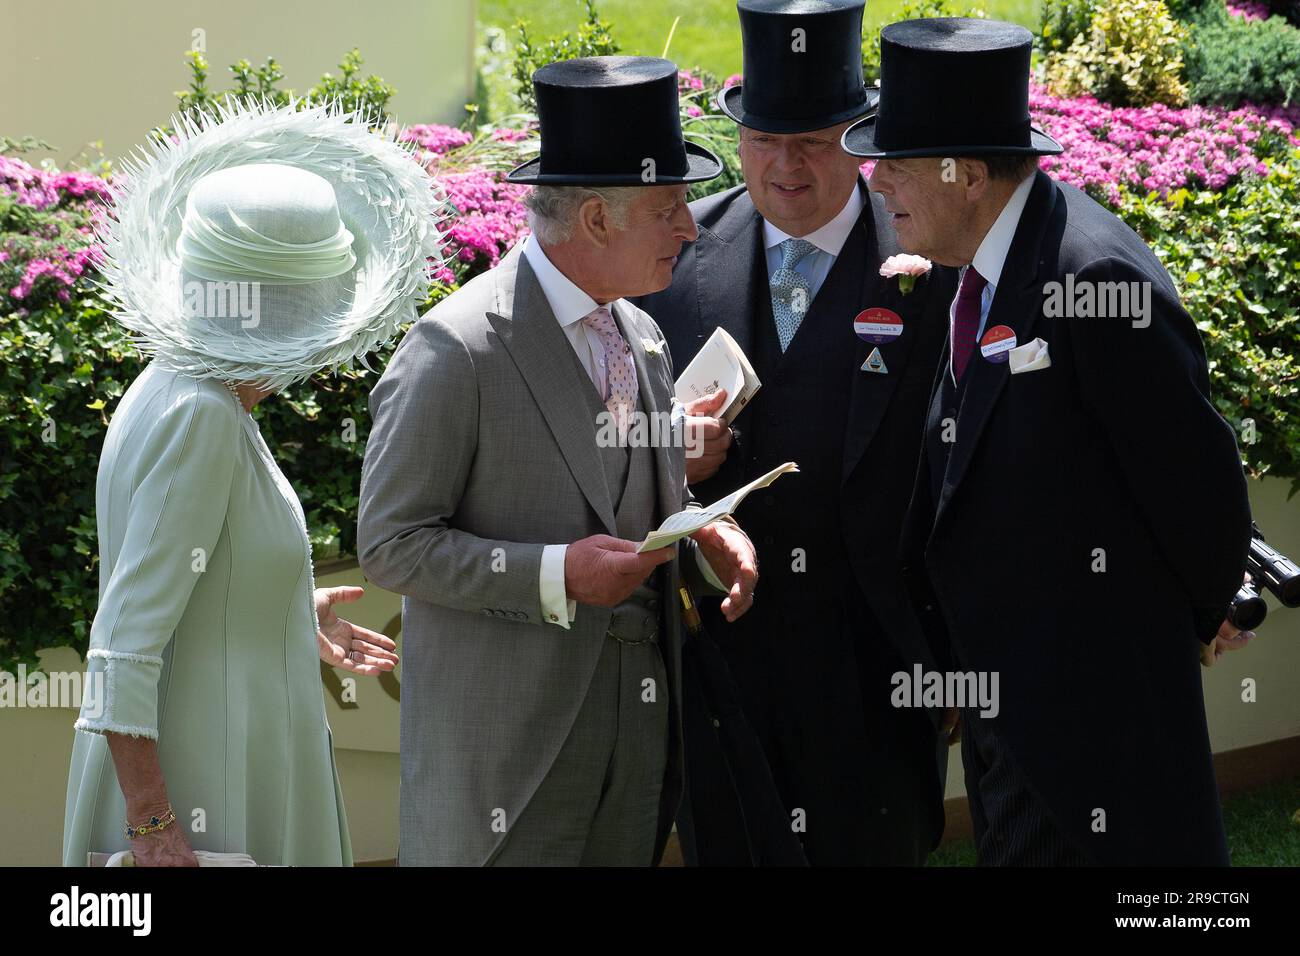 Ascot, Berkshire, UK. 22nd, June, 2023. King Charles III in the Parade Ring at Ascot Racecourse on Ladies Day chatting with Sir Francis Brooke His Majesty's Representative and The Rt. Hon the Lord Soames of Fletching (R). Credit: Maureen McLean/Alamy Stock Photo